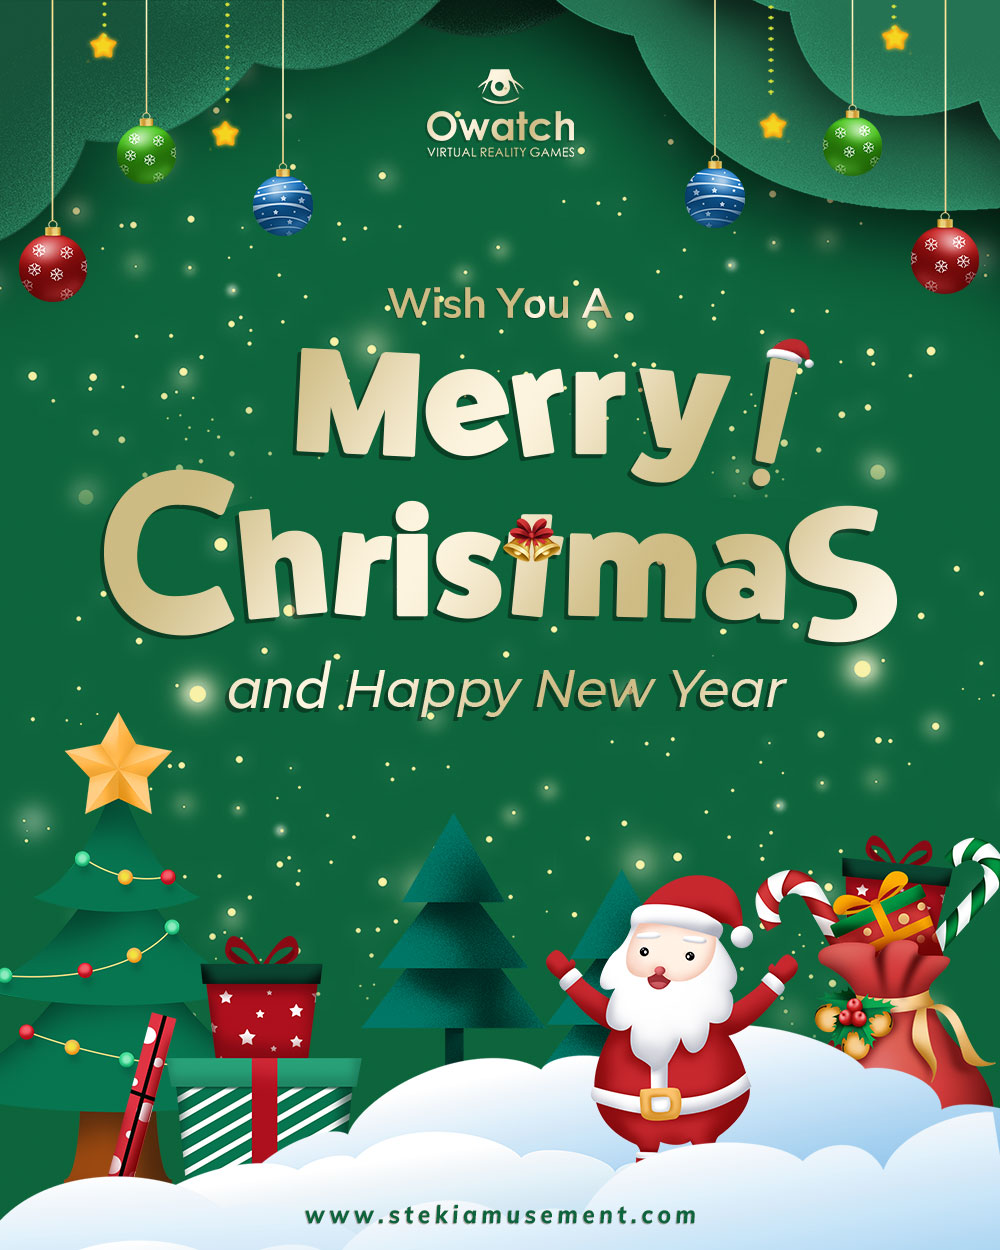 owatch wishes you a Merry Christmas and a Happy New Year 2023!